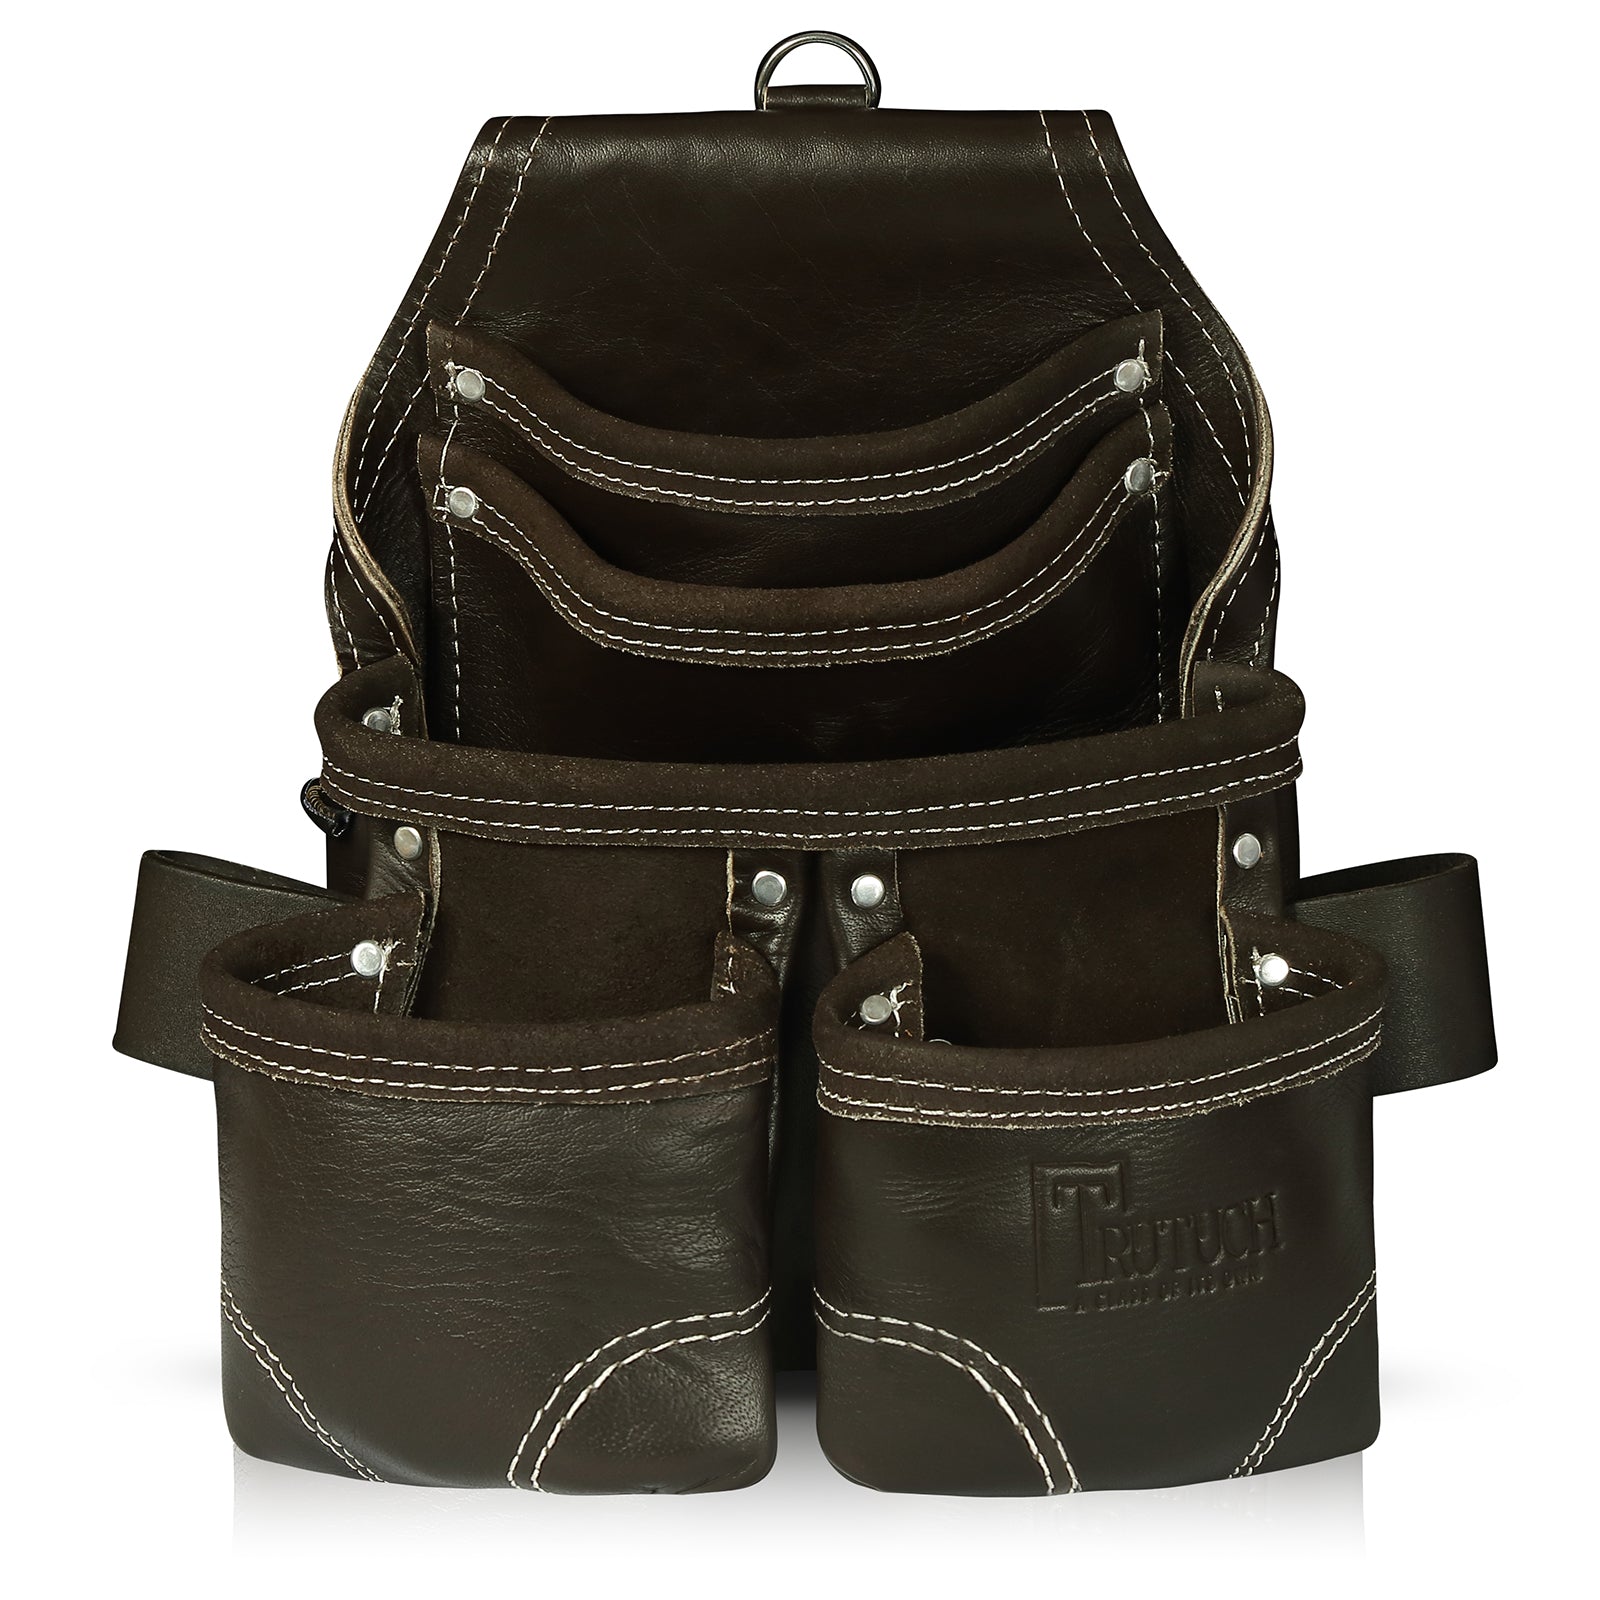 Trutuch Leather Carpenter tool Pouch With Belt, Double Outer Pockets, Chocolate Color, TT-200-P-710-B